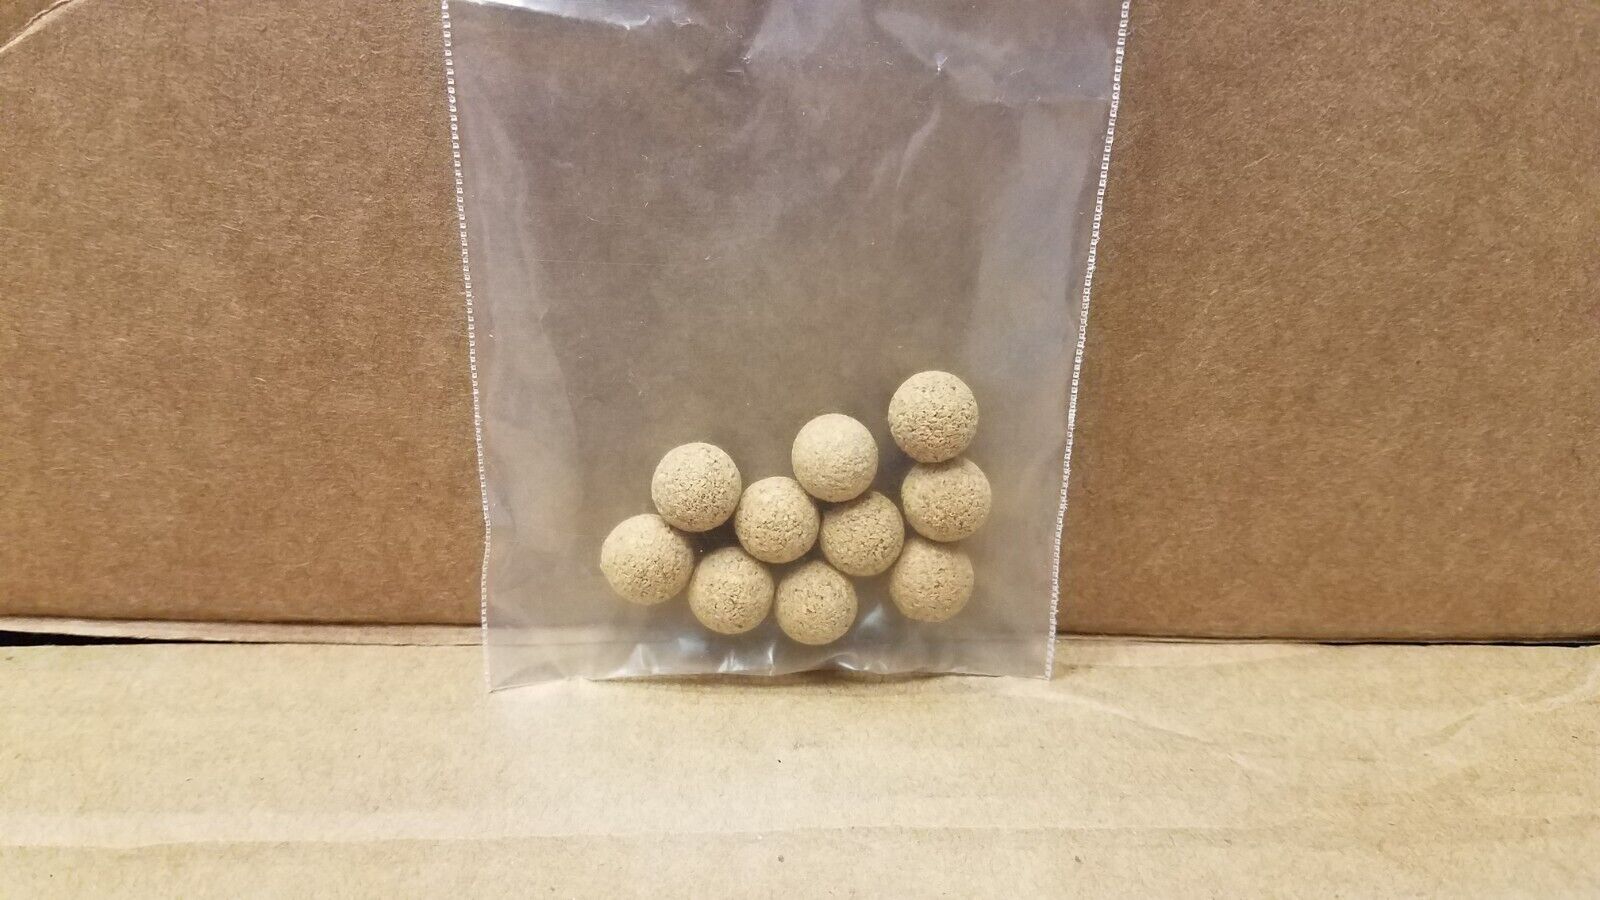 10 x lot Whistle Cork ball replacements for marching band music Unbranded